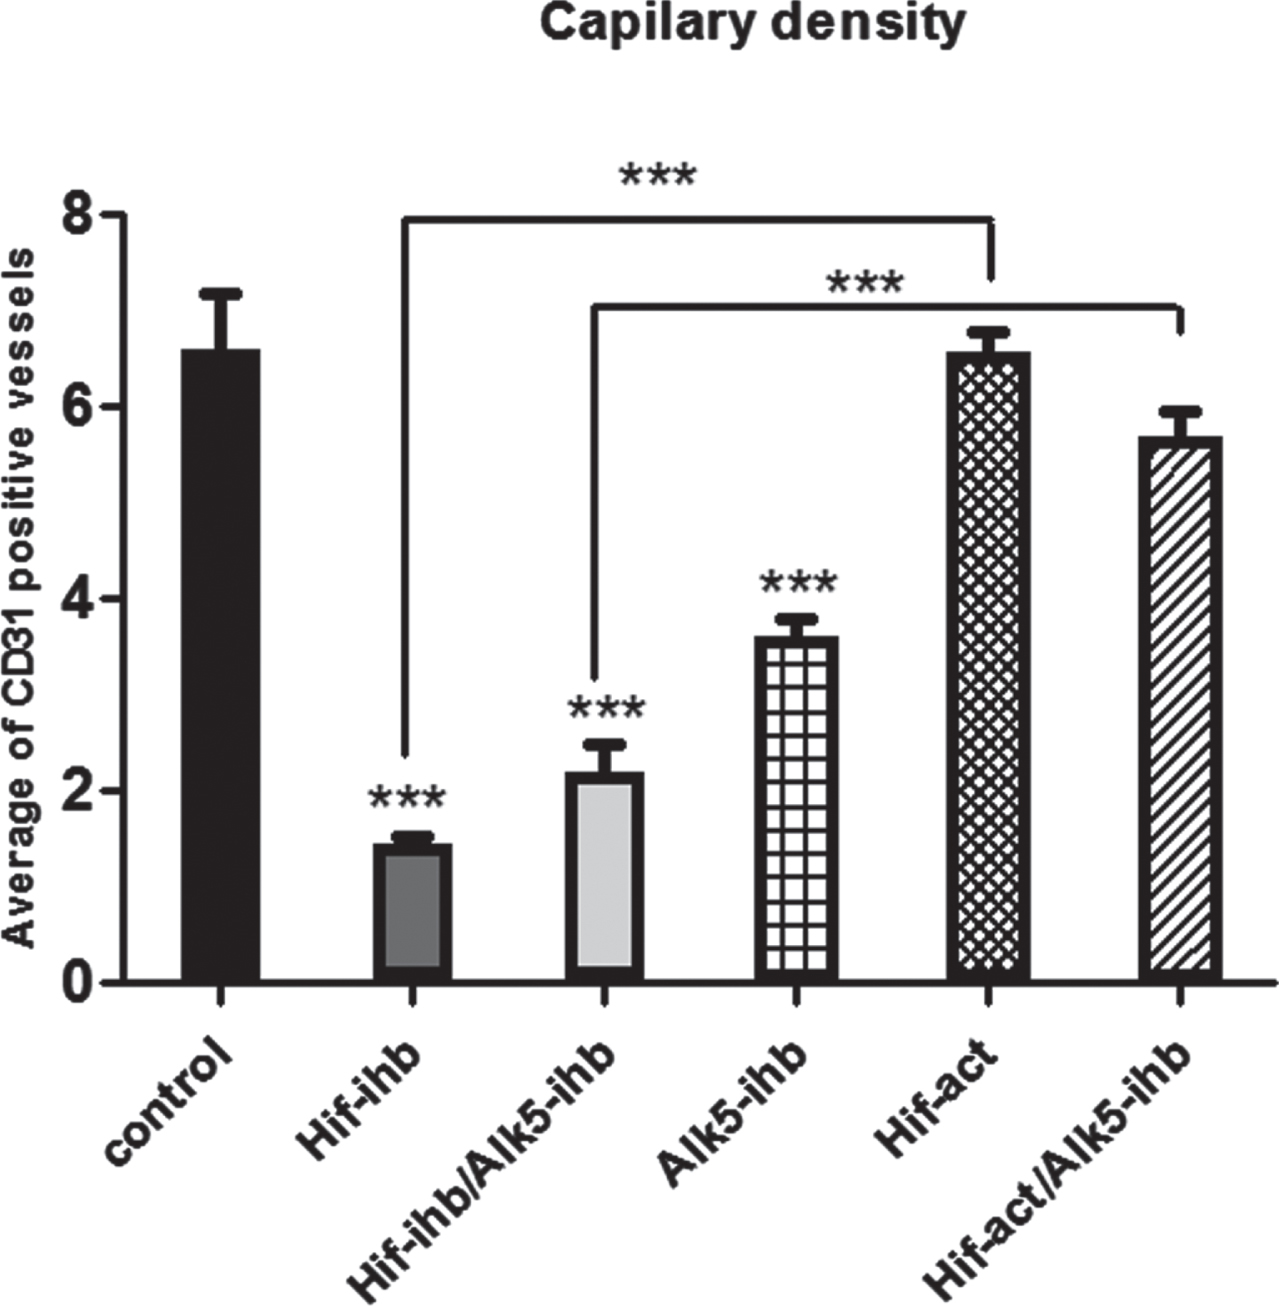 The effect of HIF-1α and ALK5 signaling pathways on the tumor vessel density in a mouse melanoma model. There was significantly lower vessel density in the HIF-ihb, HIF-ihb/alk5-ihb, and Alk-ihb groups than in the control group. Capillary density increased in the HIF-act group compared with the HIF-ihb. The capillary density in the HIF-act/Alk5-ihb group was higher than in the HIF-ihb/ Alk5-ihb group. (***p < 0.001) and (*p < 0.05). Each bar represents mean±SEM. Alk5-ihb: ALK5 inhibitor, HIF-ihb: HIF-1α inhibitor, HIF-act: HIF-1α activator.